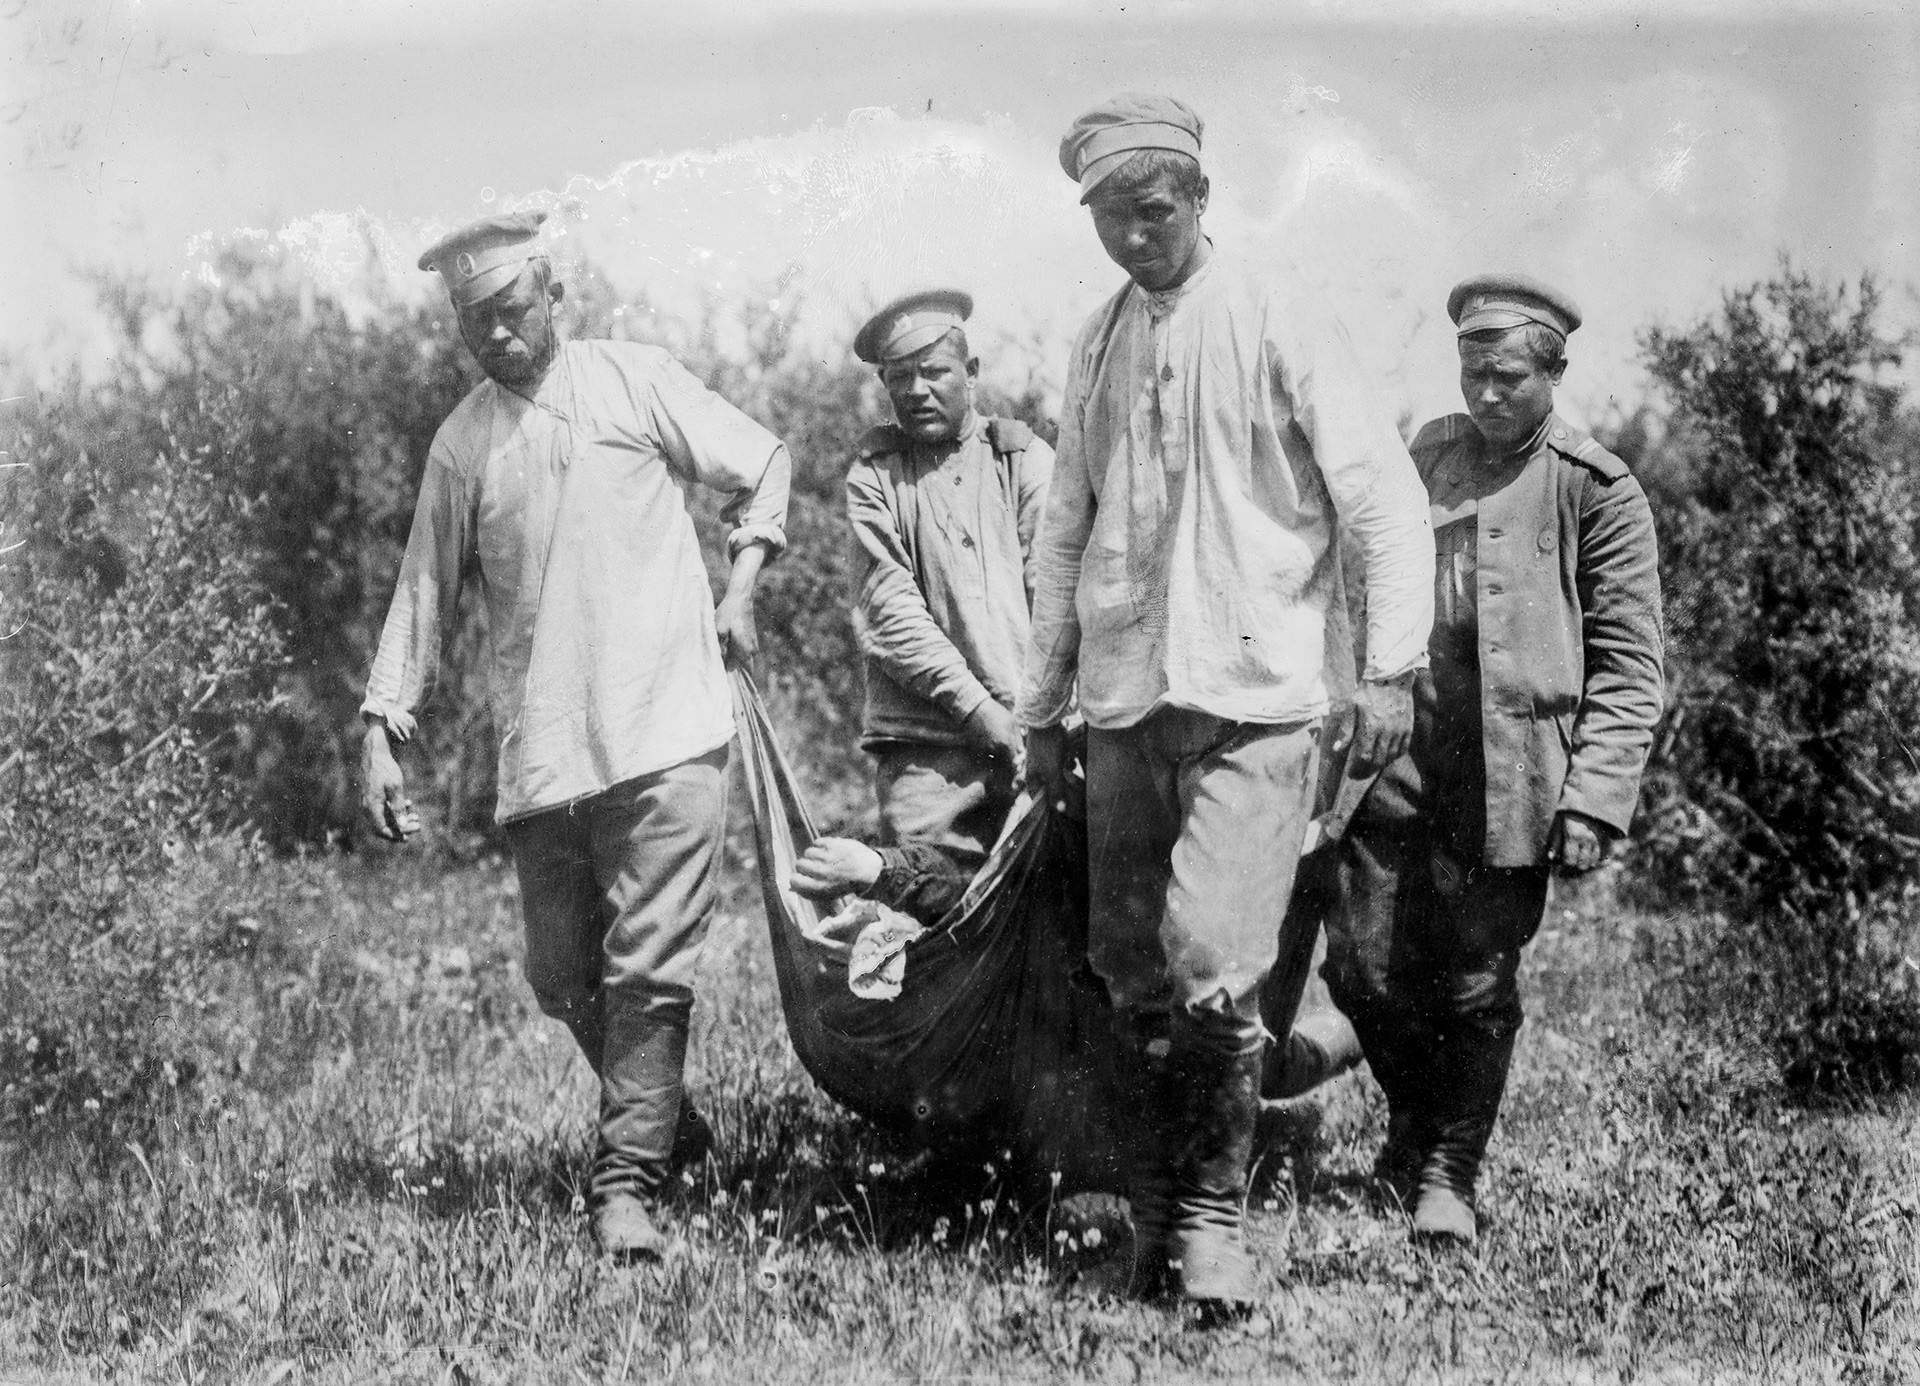 Russian soldiers collect their dead from the battlefield during World War I